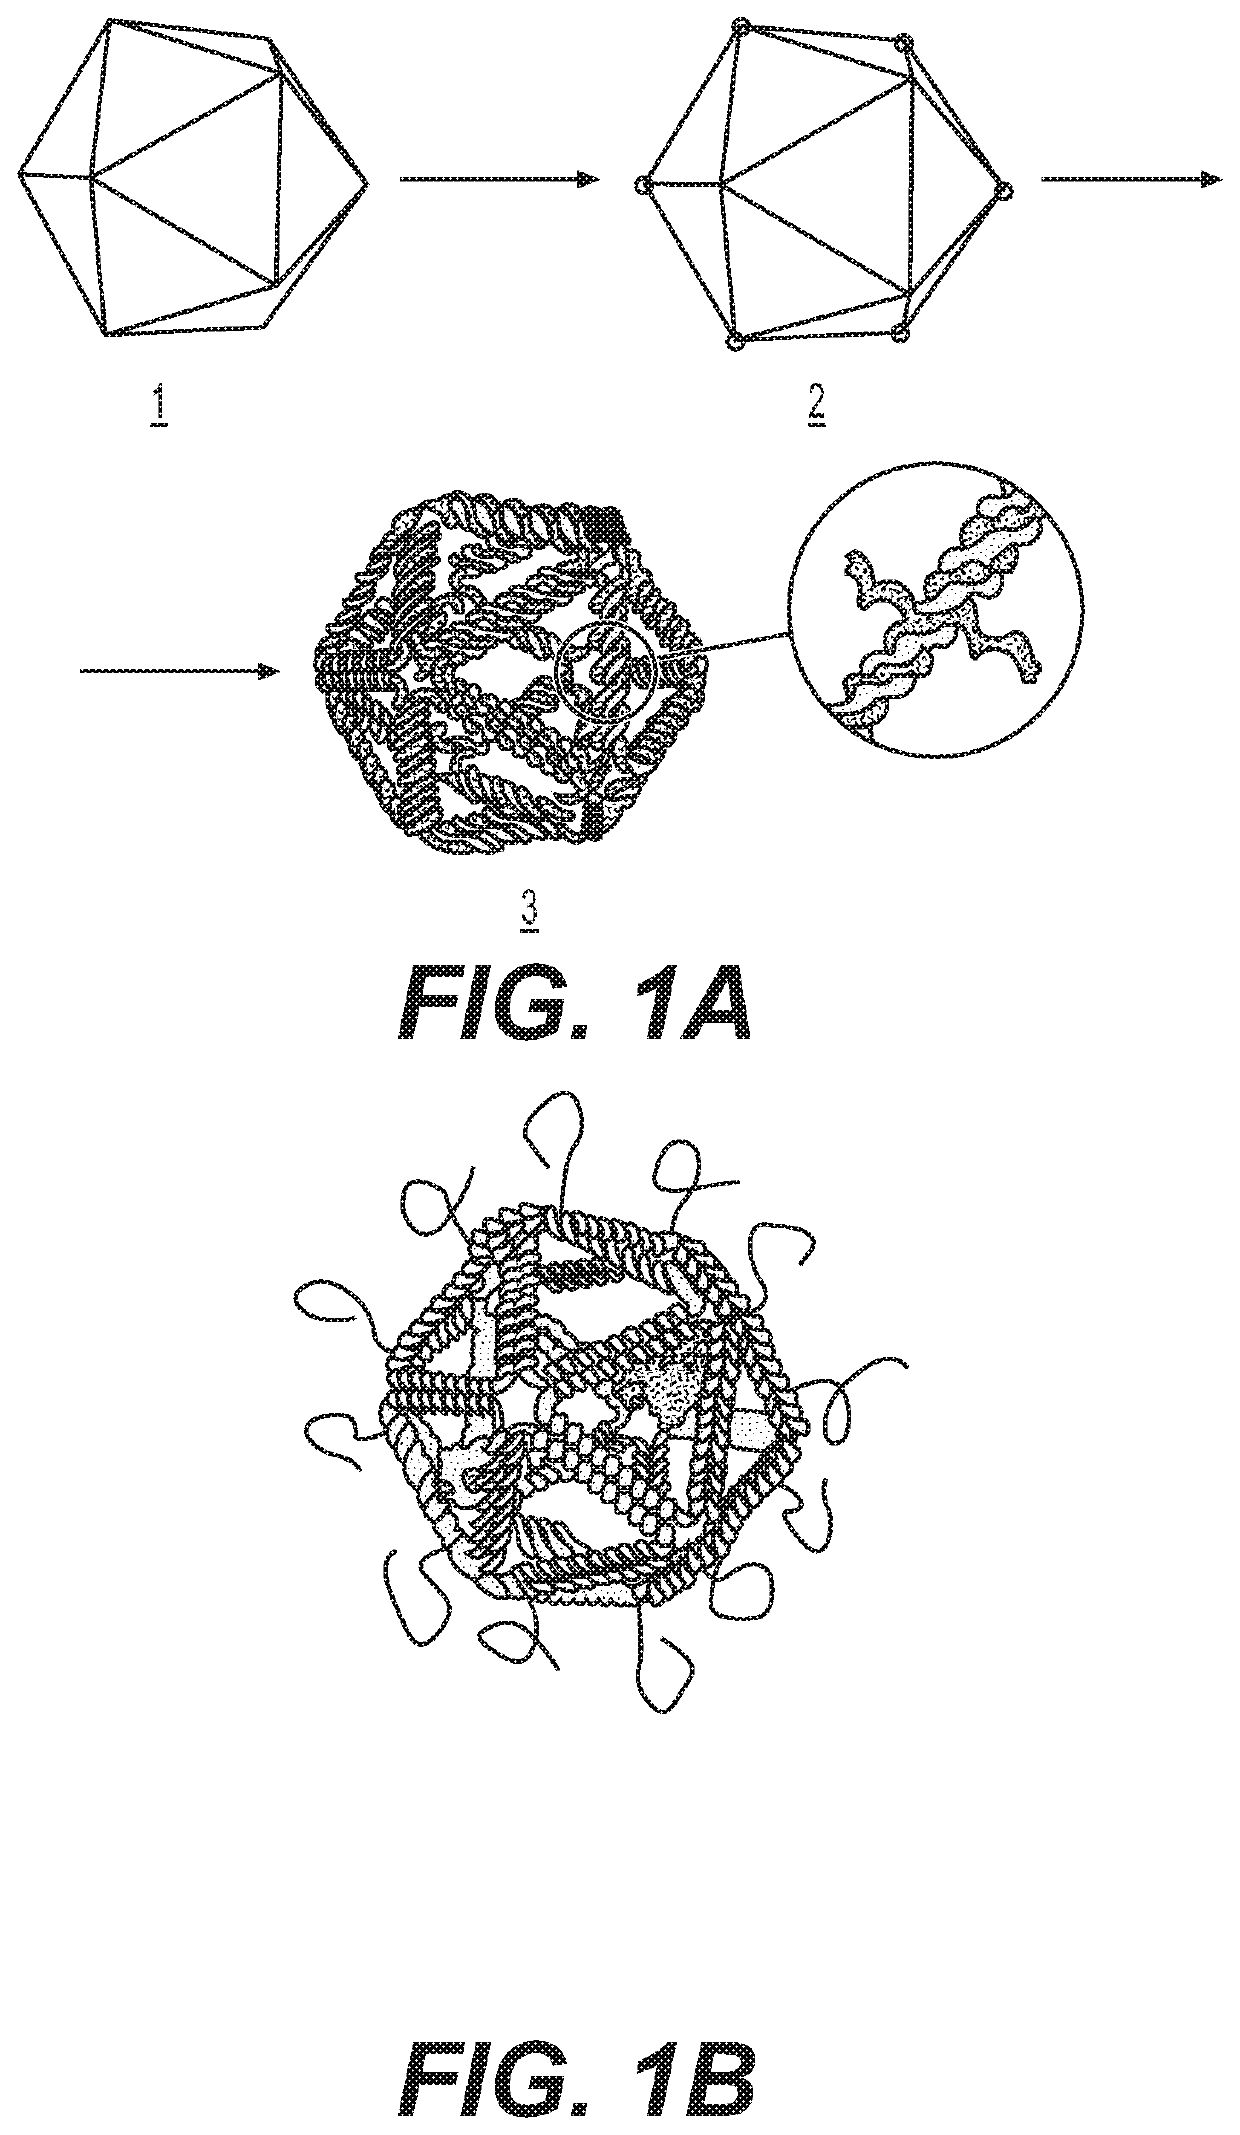 Nucleic acid assemblies for use in targeted delivery